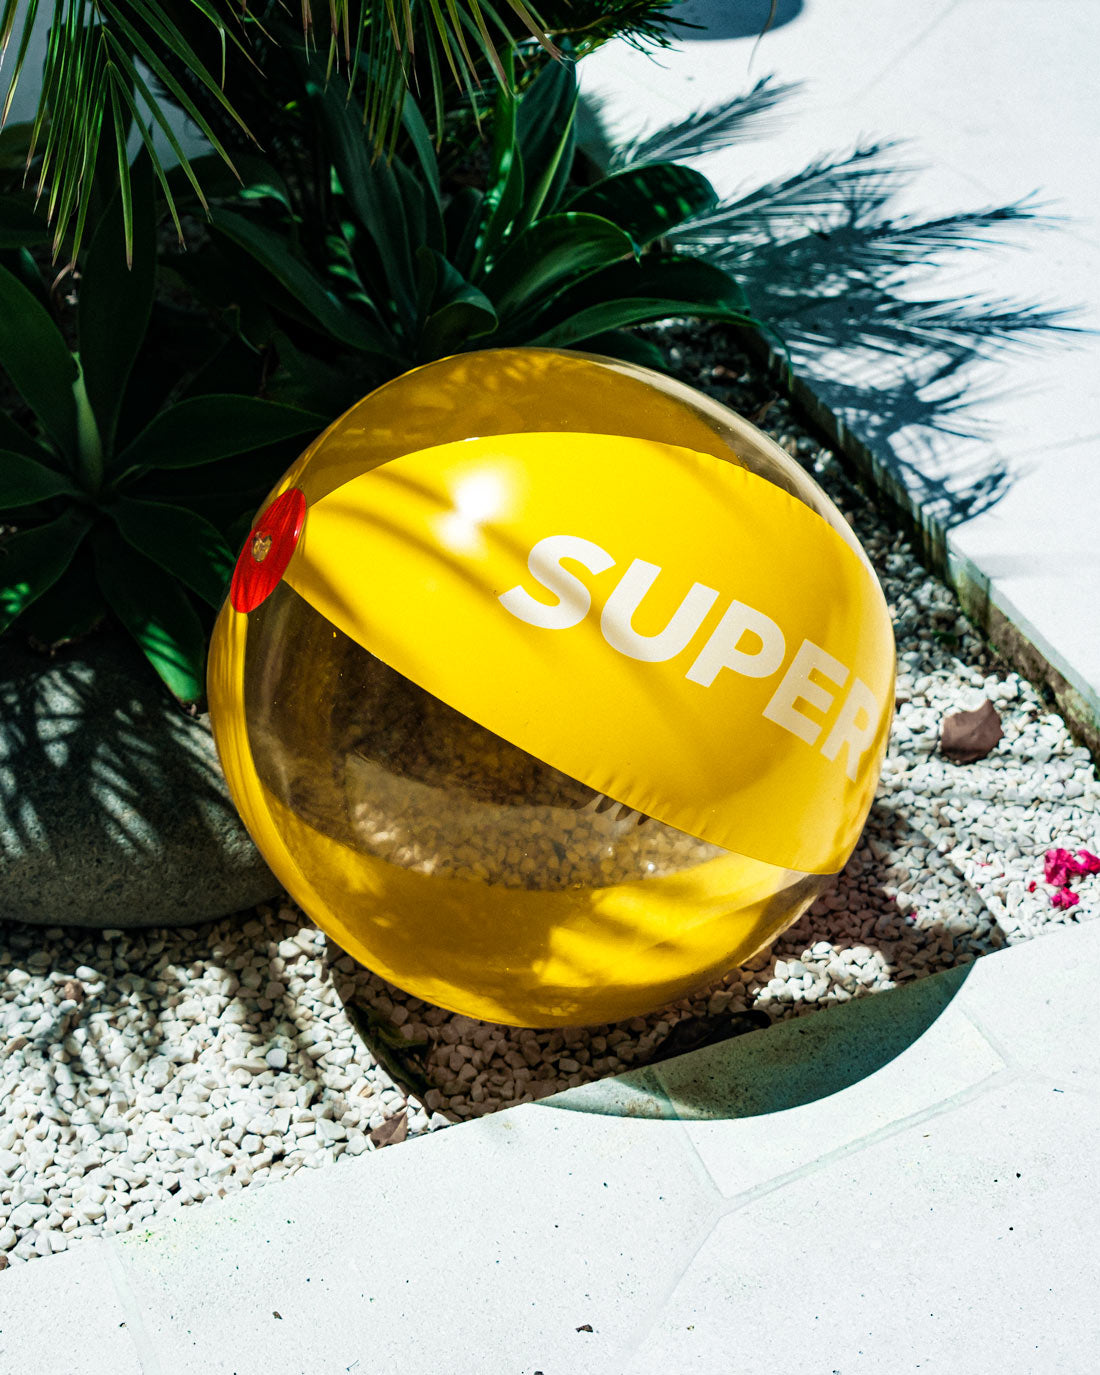 Beach ball with solid yellow and clear design.